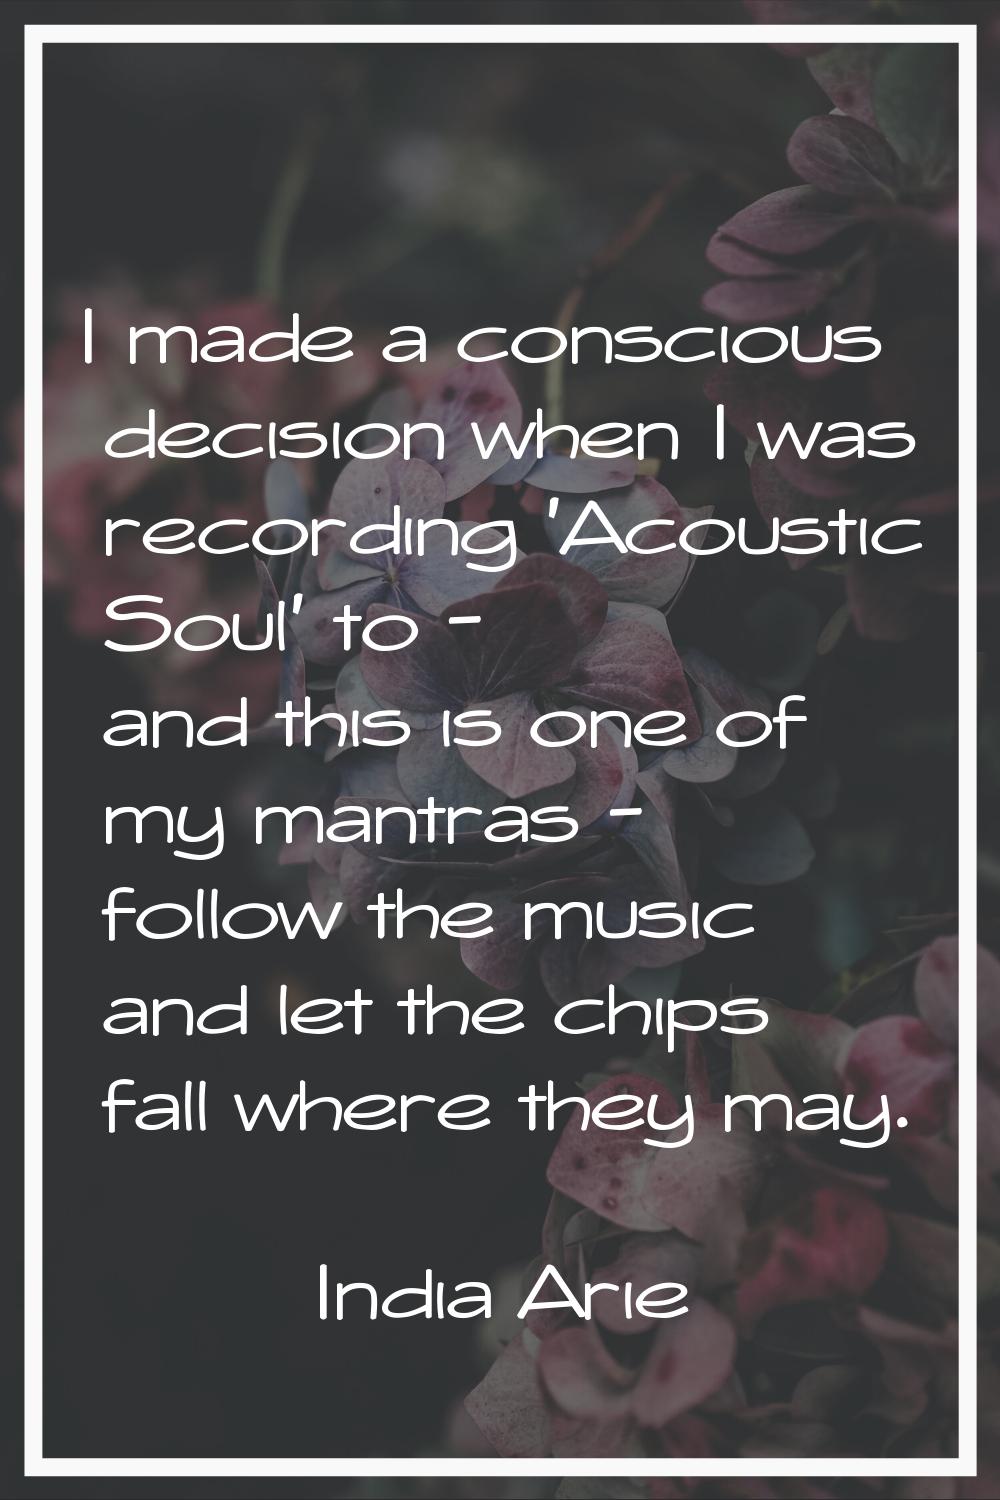 I made a conscious decision when I was recording 'Acoustic Soul' to - and this is one of my mantras